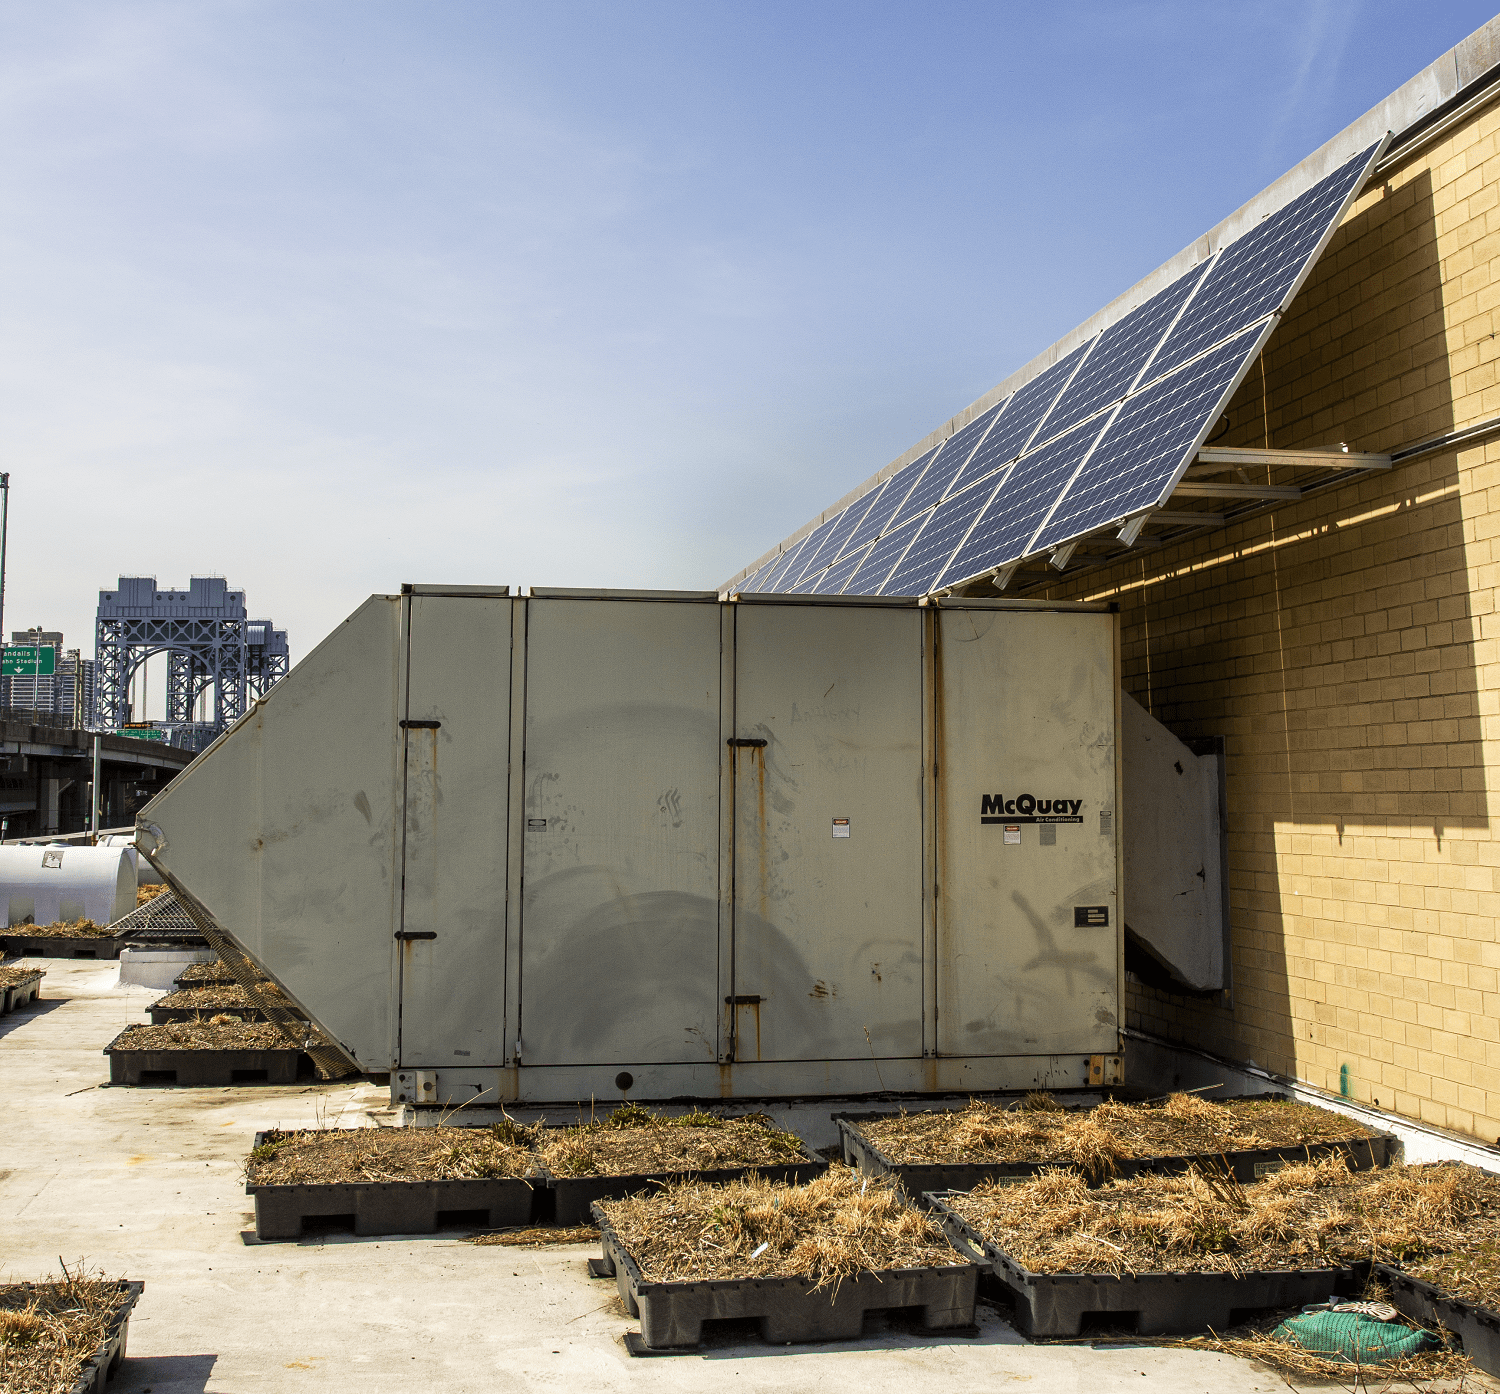 A picture of modular trays of green roof slotted around a large piece of machinery.